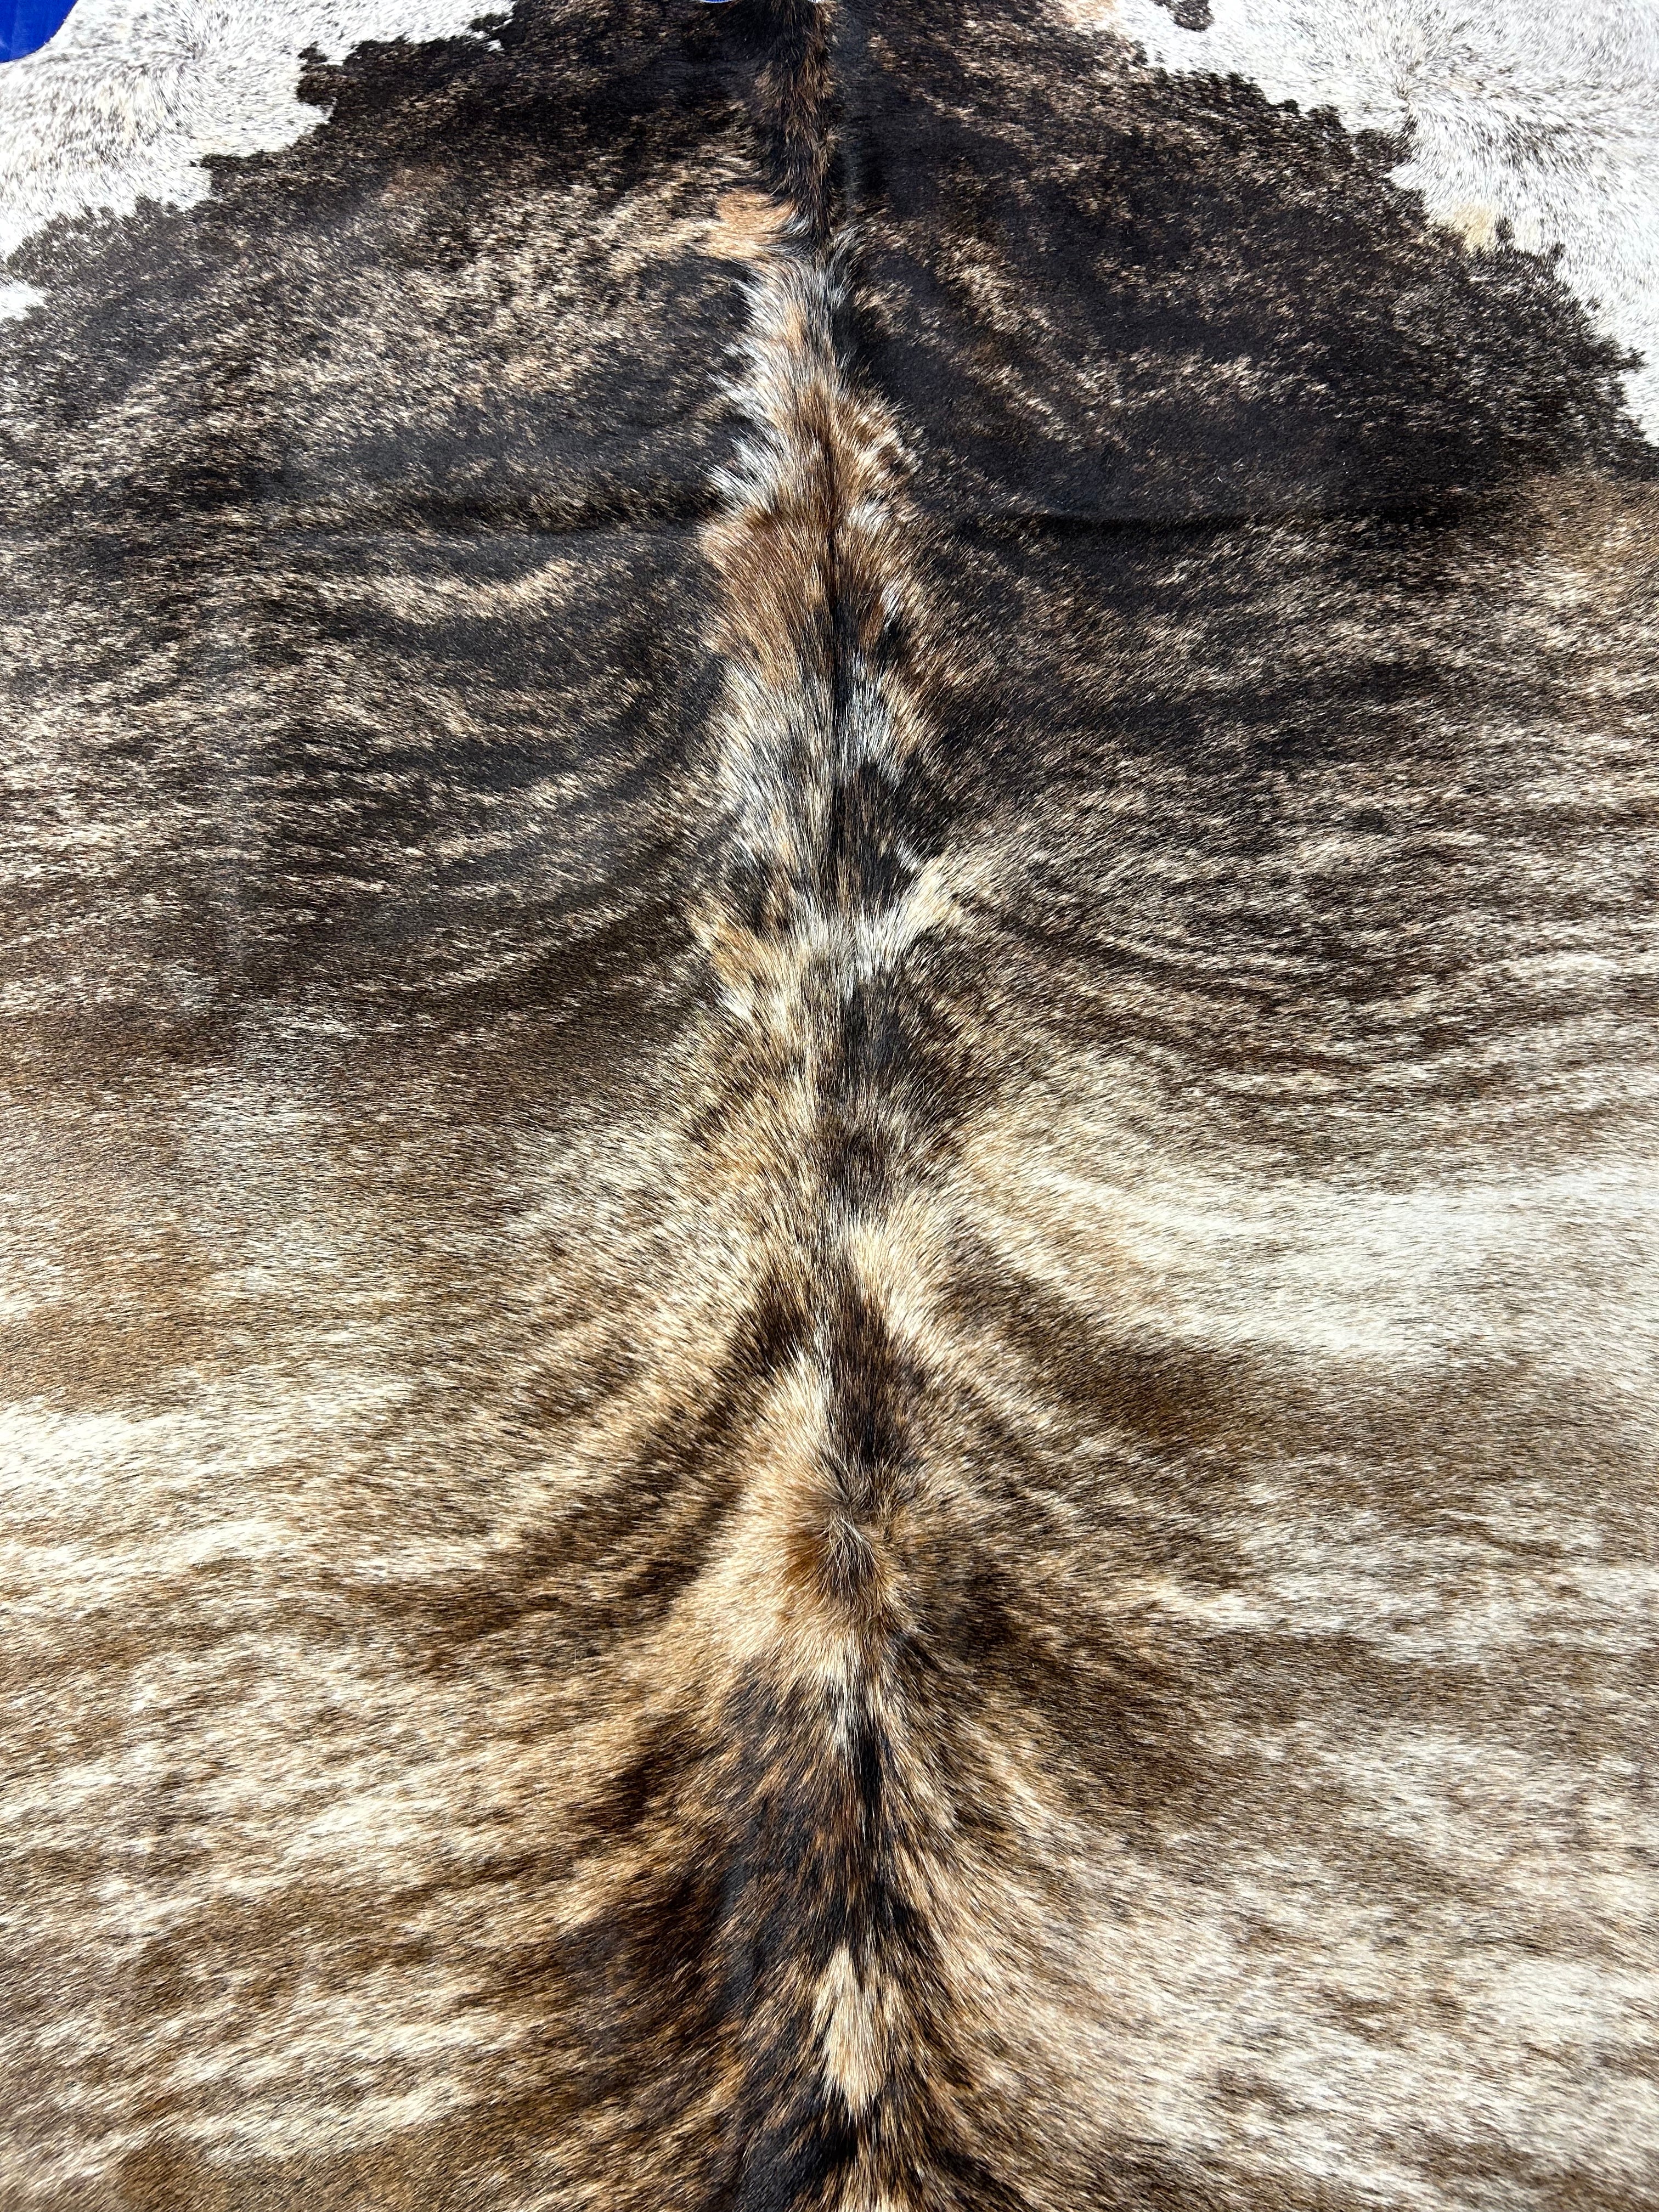 Gorgeous Light Brindle Cowhide Rug with White Belly Size: 8x7 feet O-416